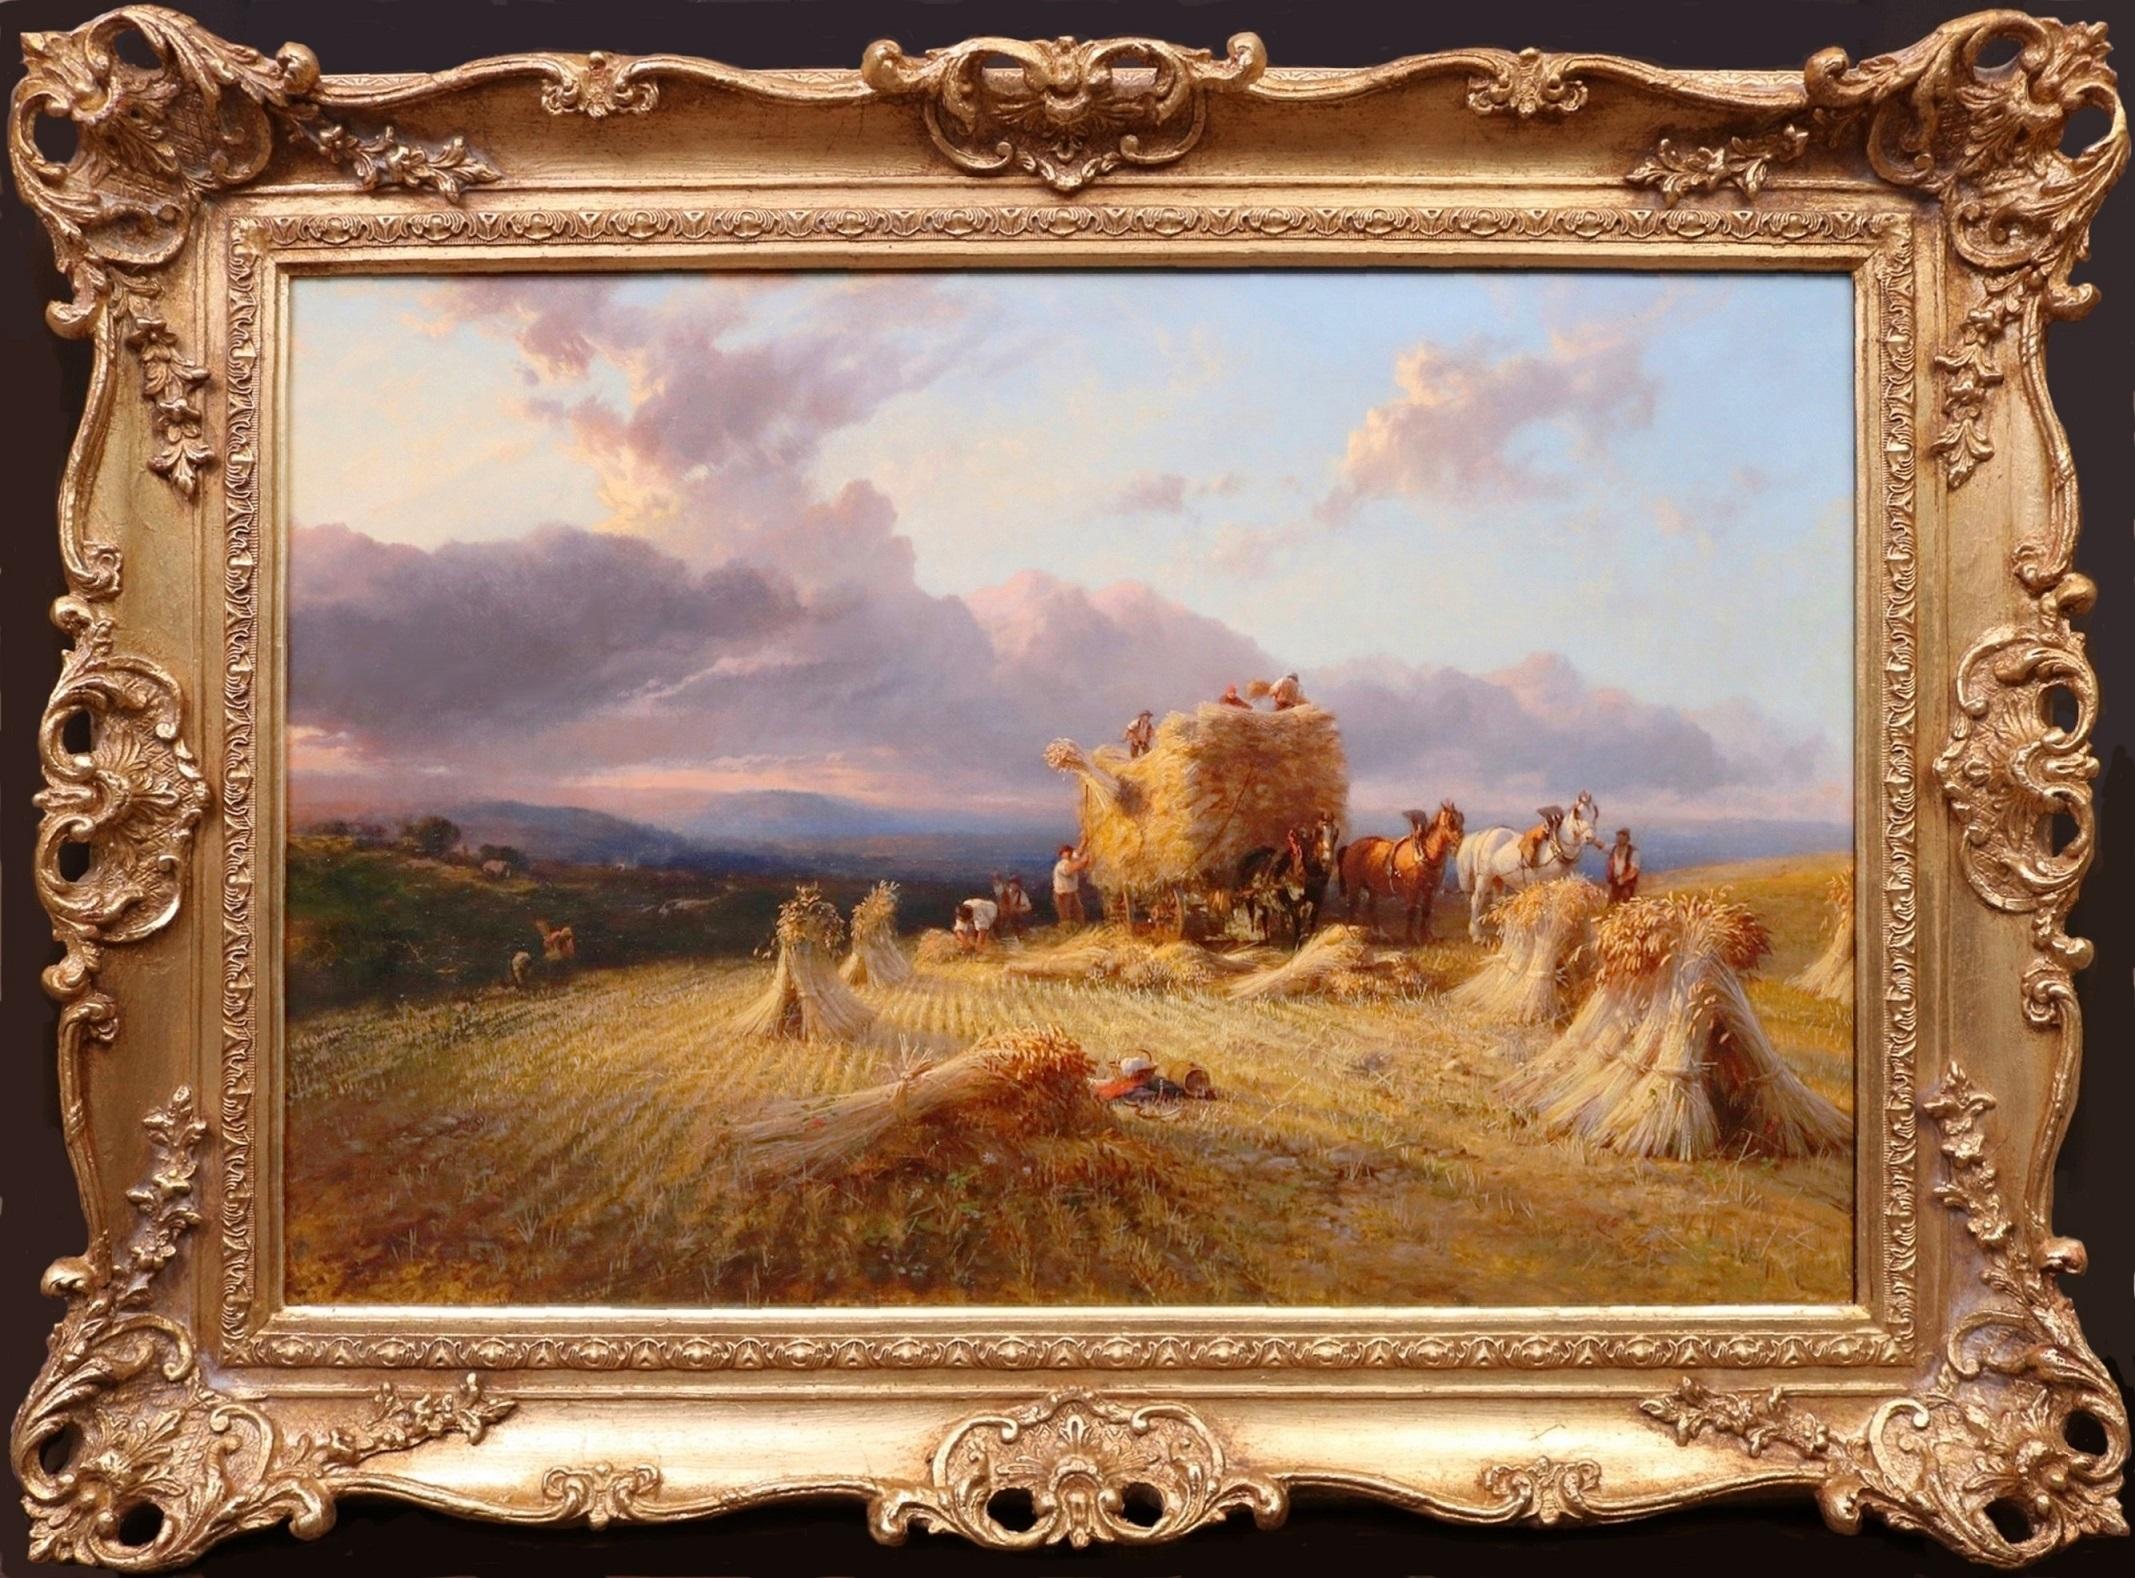 George Cole Animal Painting - Harvesting in Surrey - Large 19th Century Oil Painting English Sunset Landscape 